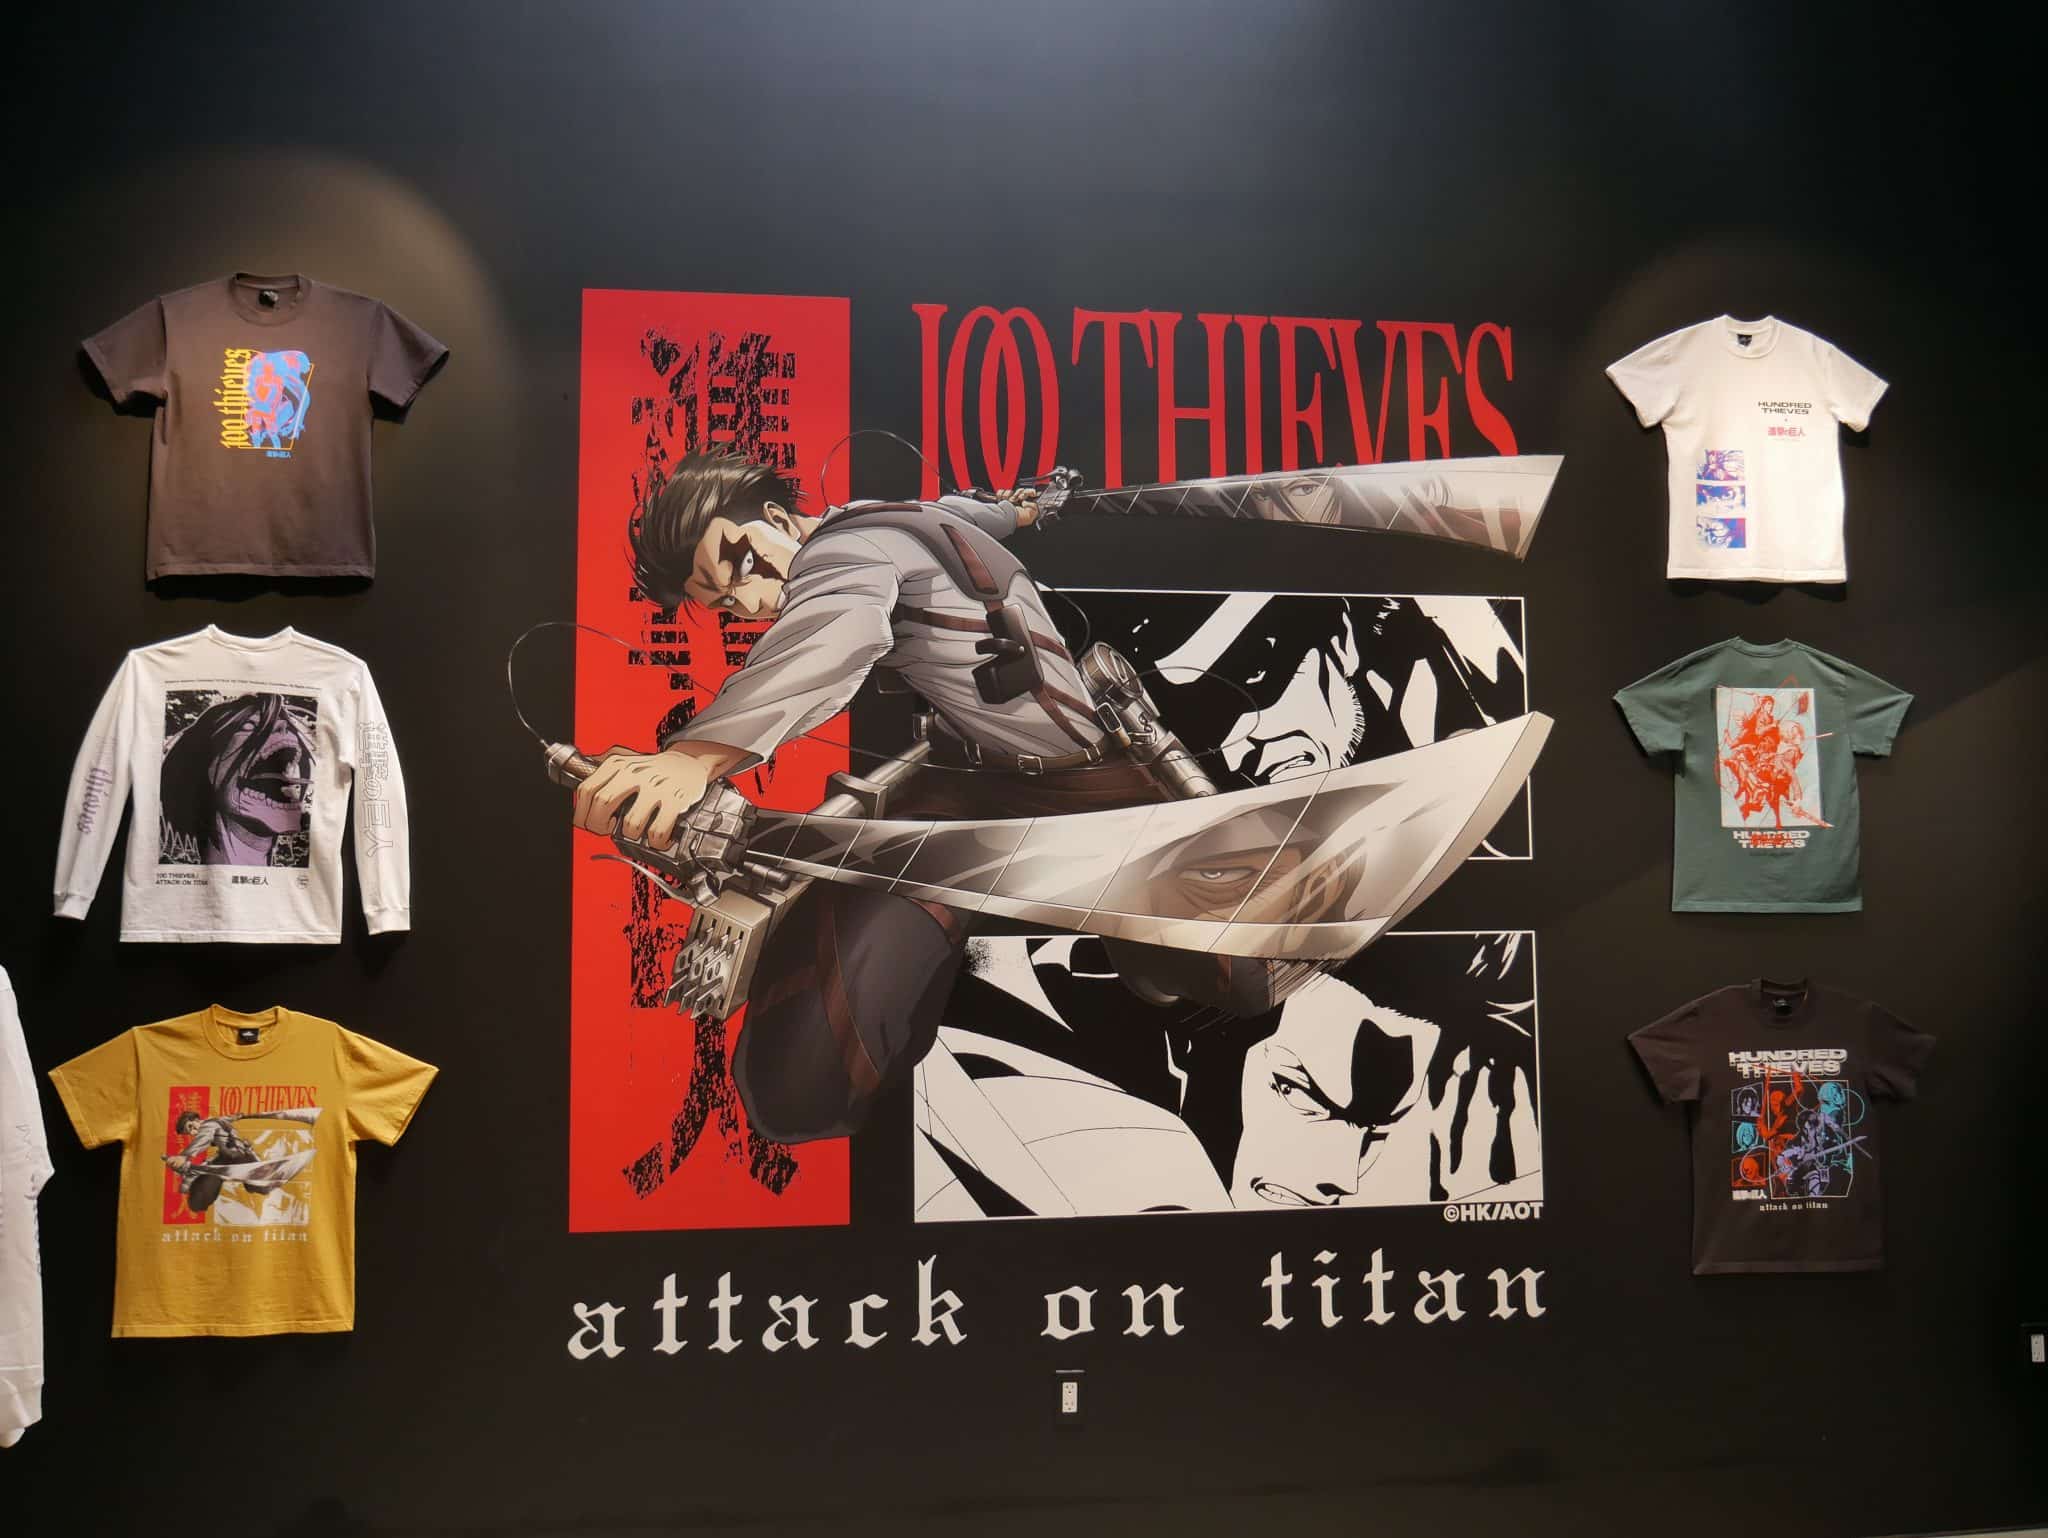 Attack On Titan Pop-Up Shop Goes Viral Following Its Texas Debut